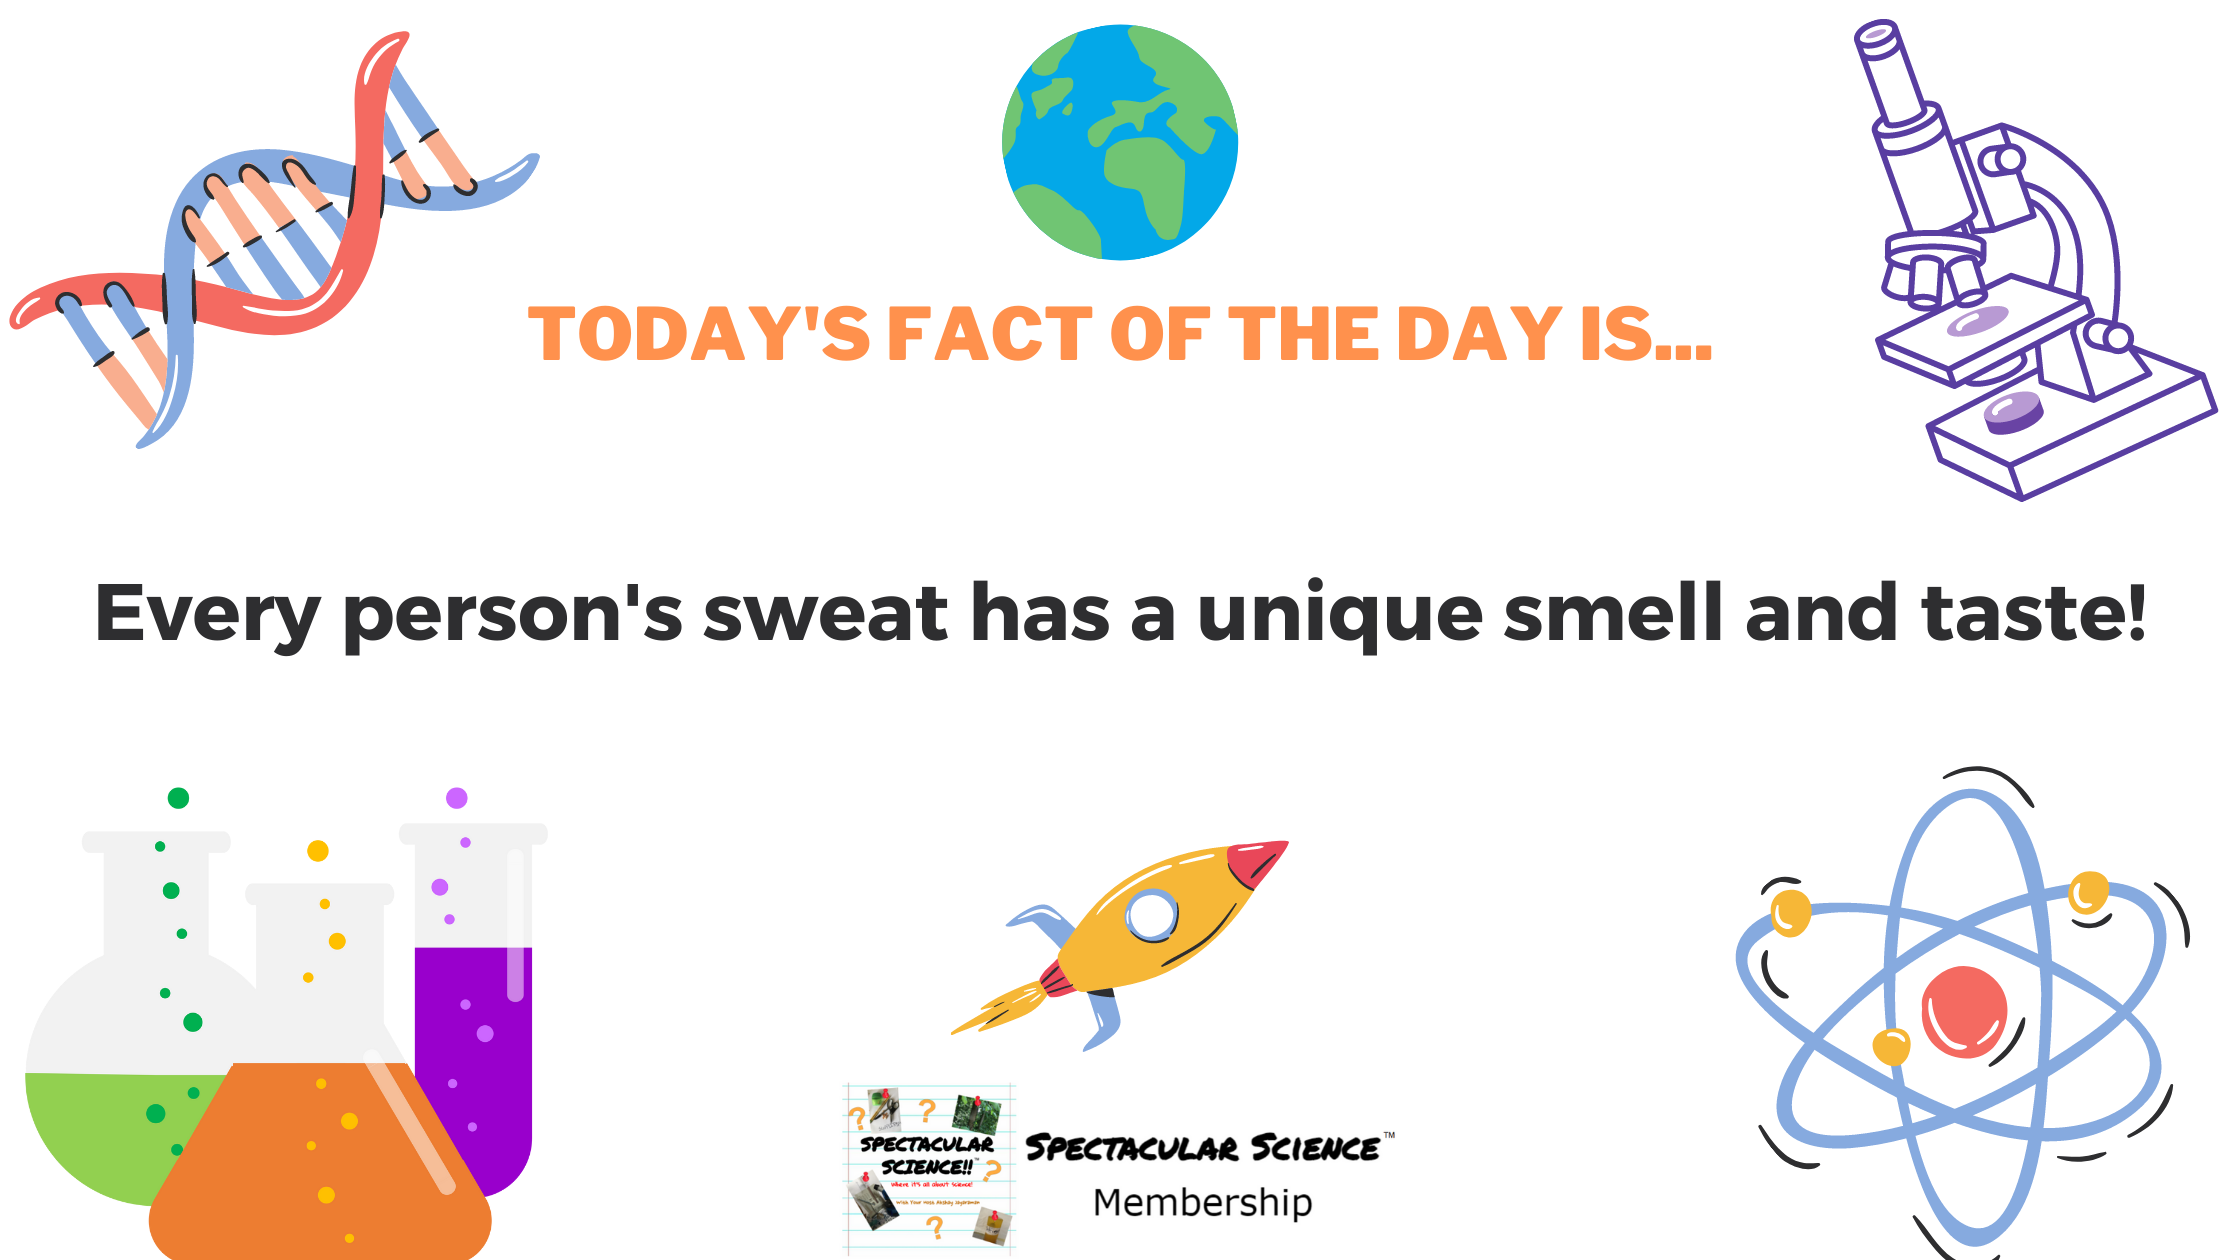 Fact of the Day Image Mar. 9th